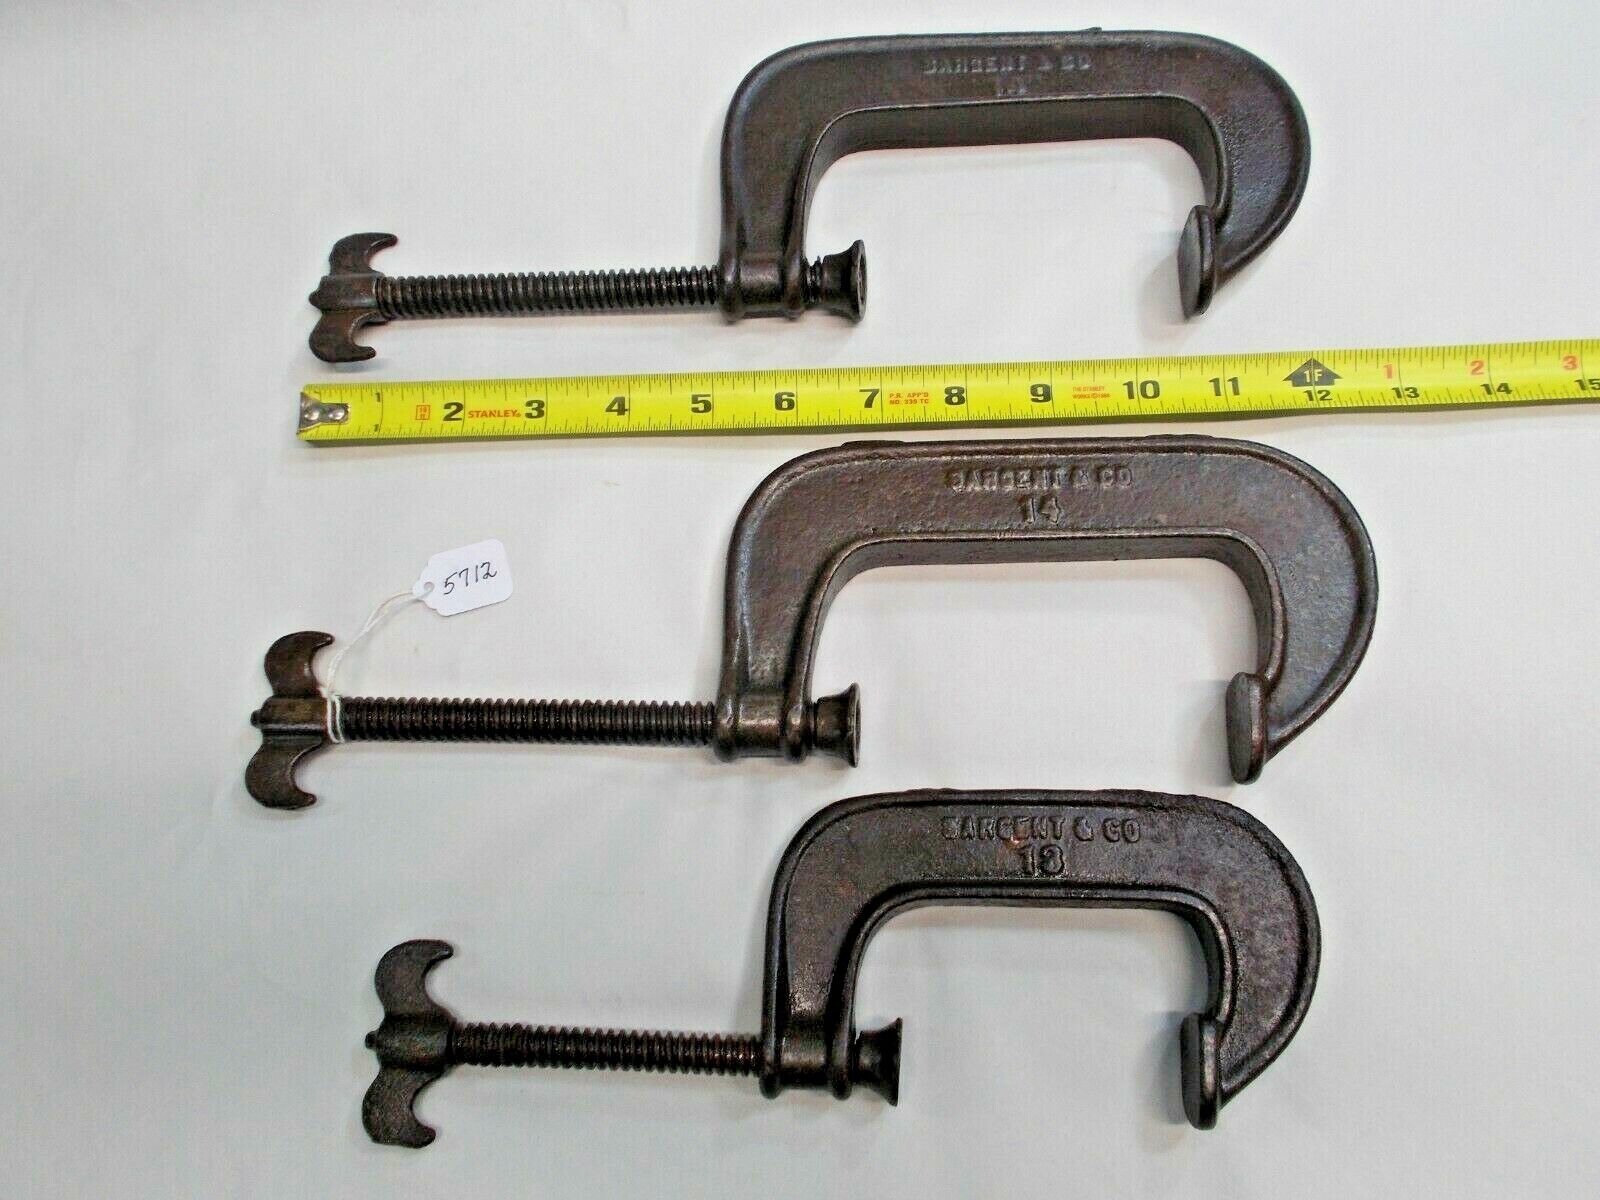 C Clamps, (3) Sargent Co., Vintage C Clamps, 3, 4 & 4" Butterfly Knobs, Usa